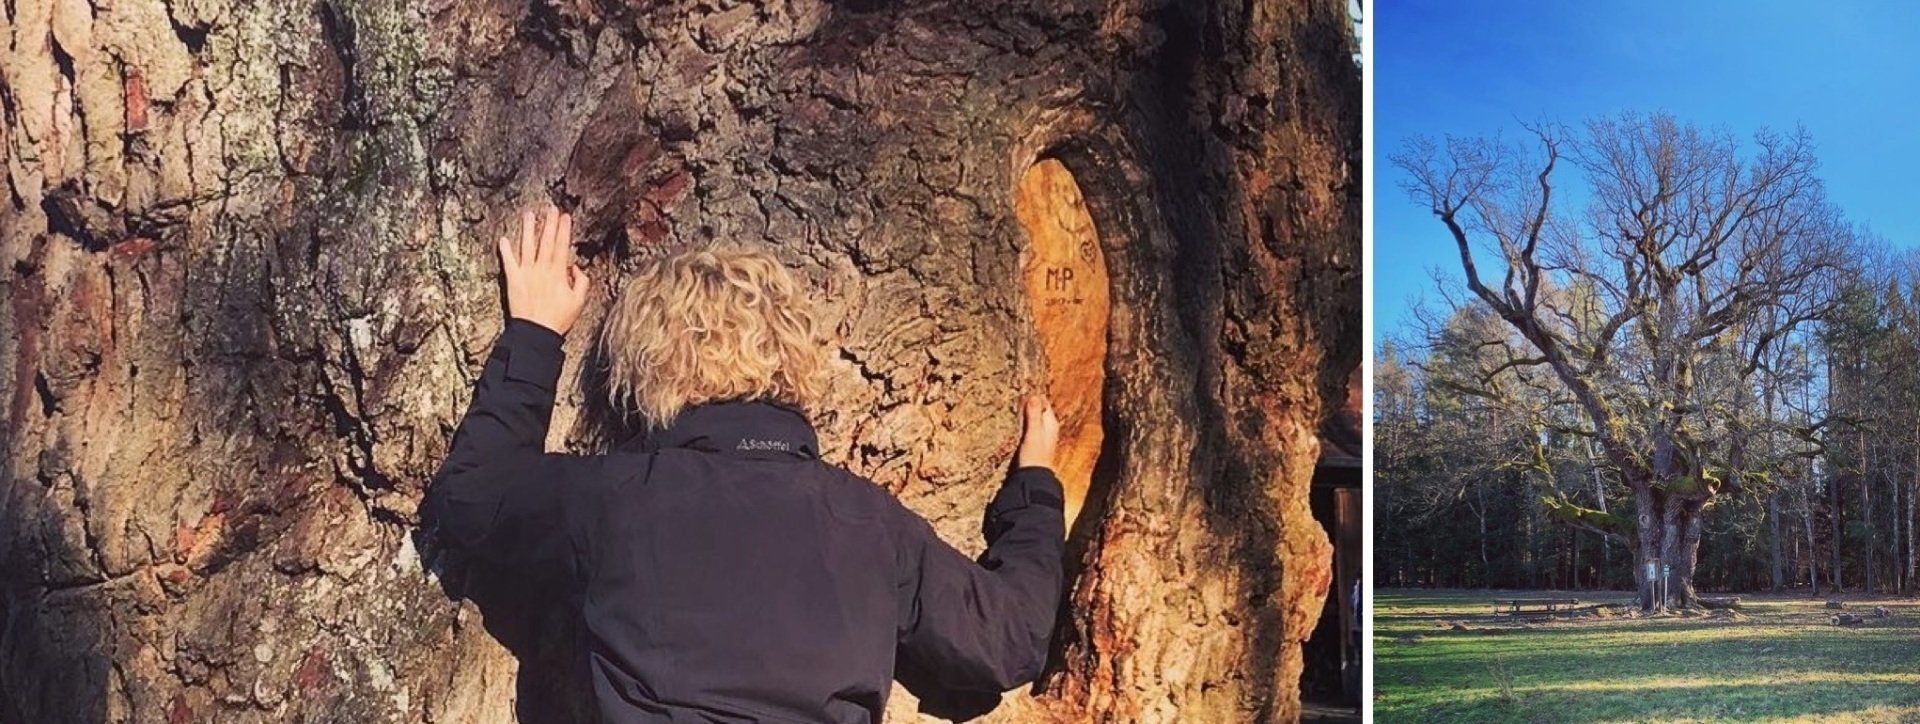 How a 1000 year-old oak tree helps to travel between times and perspectives